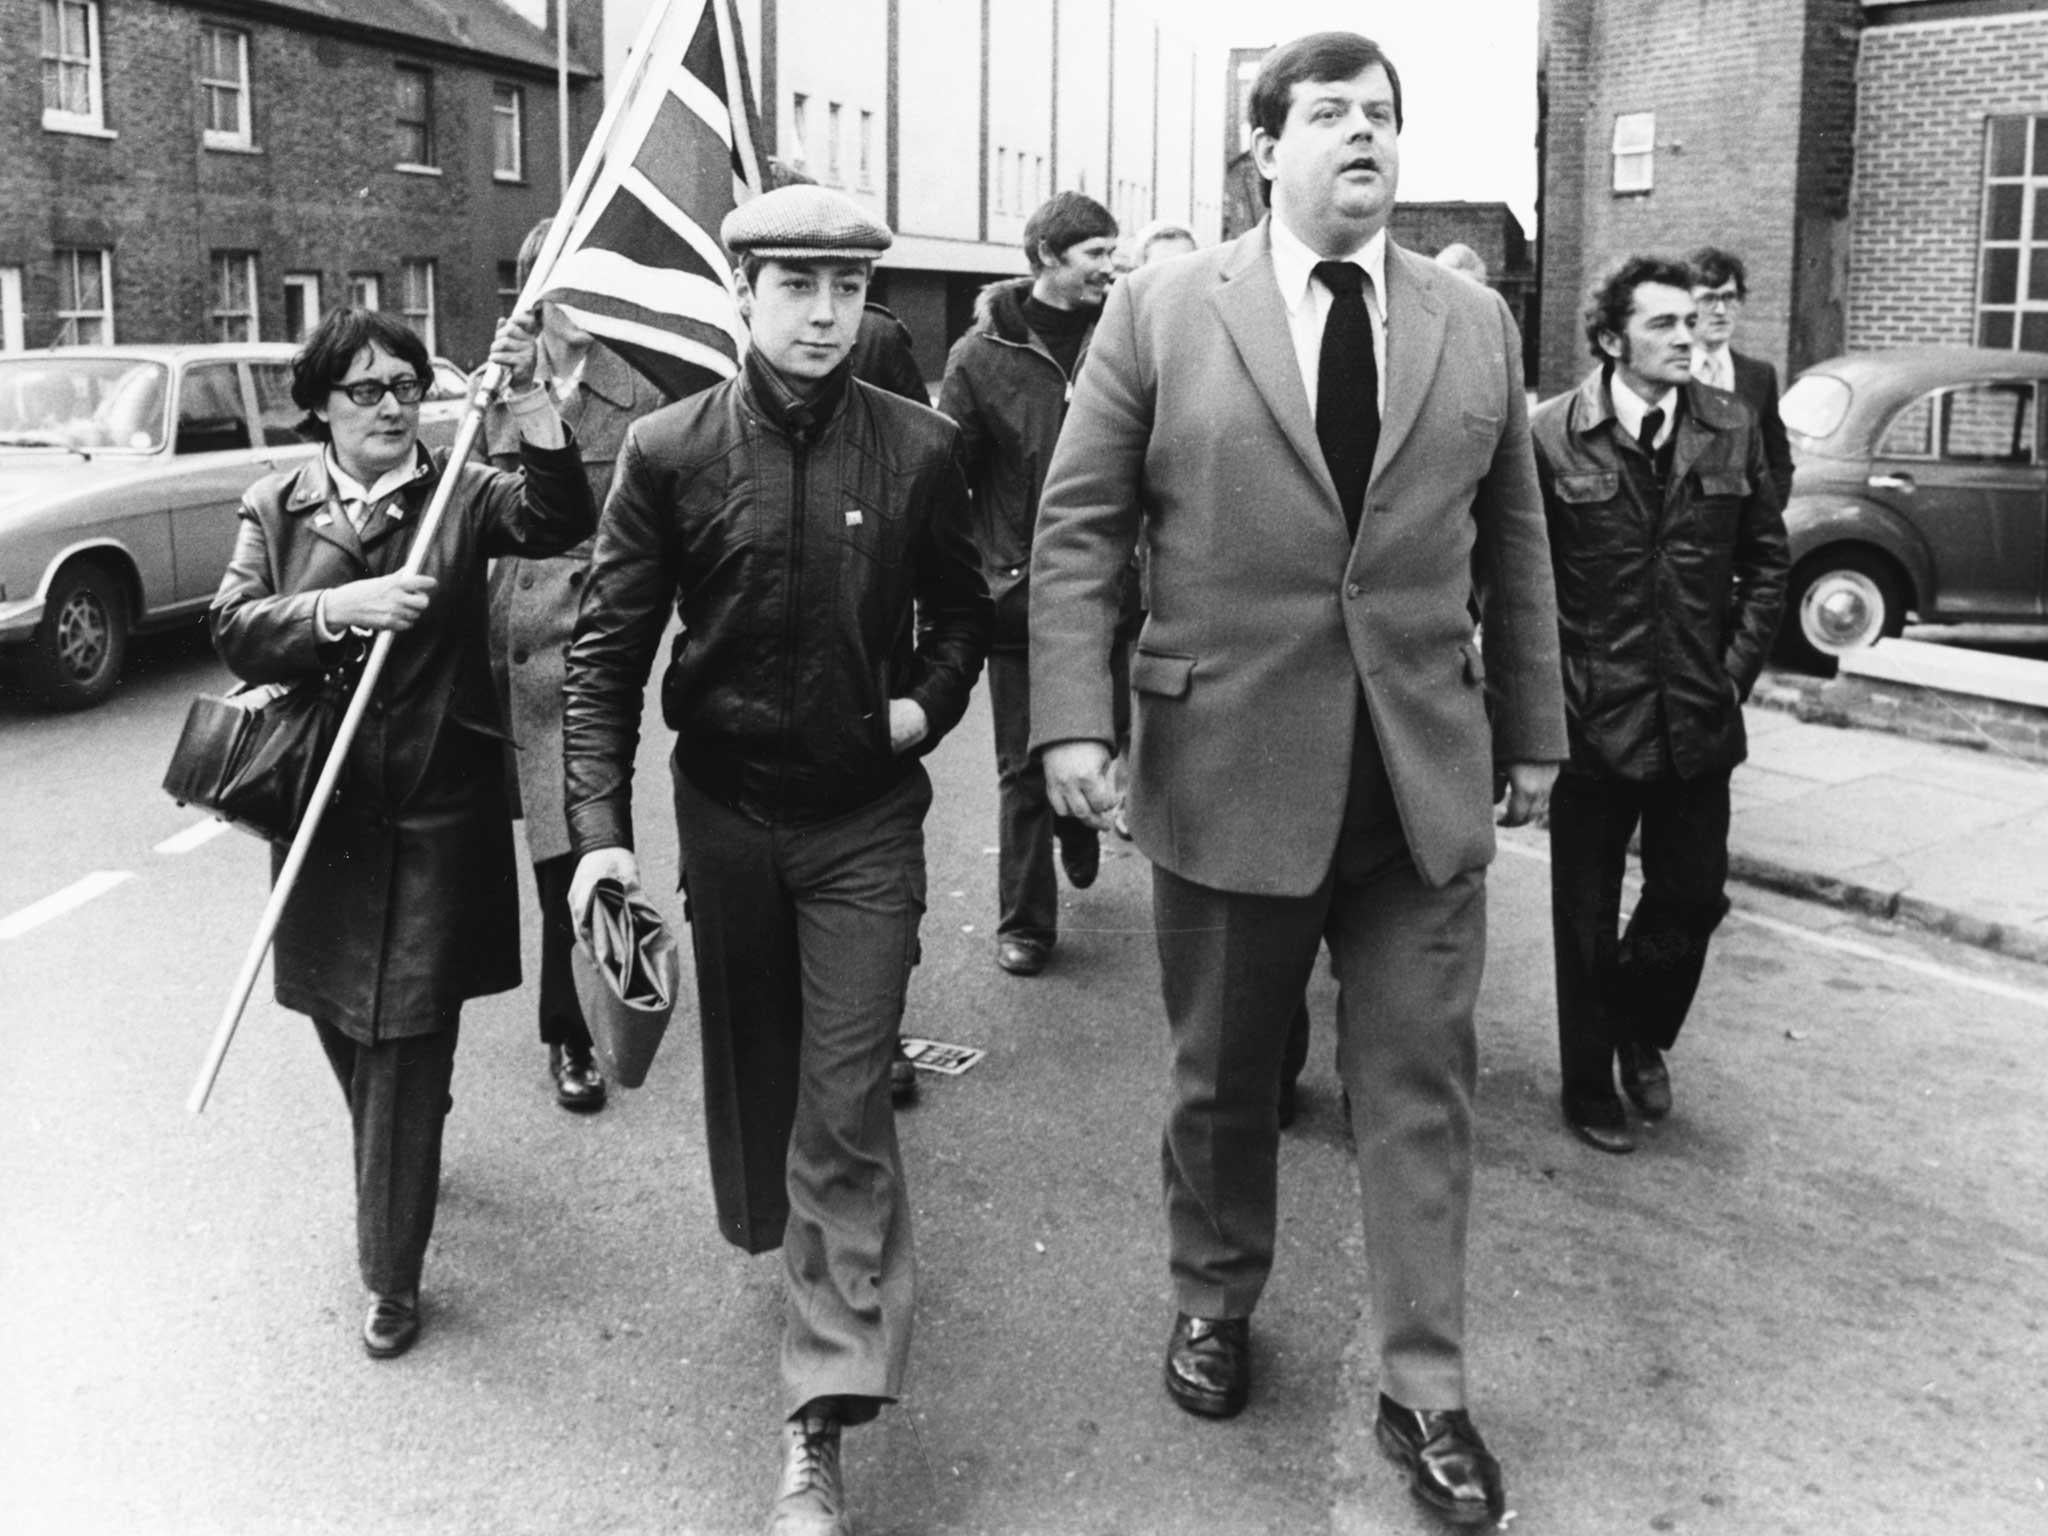 National Front leader Martin Webster leaving Kingston Crown Court with his followers, where he was given a suspended sentence for publishing material likely to incite racial hatred, 1979